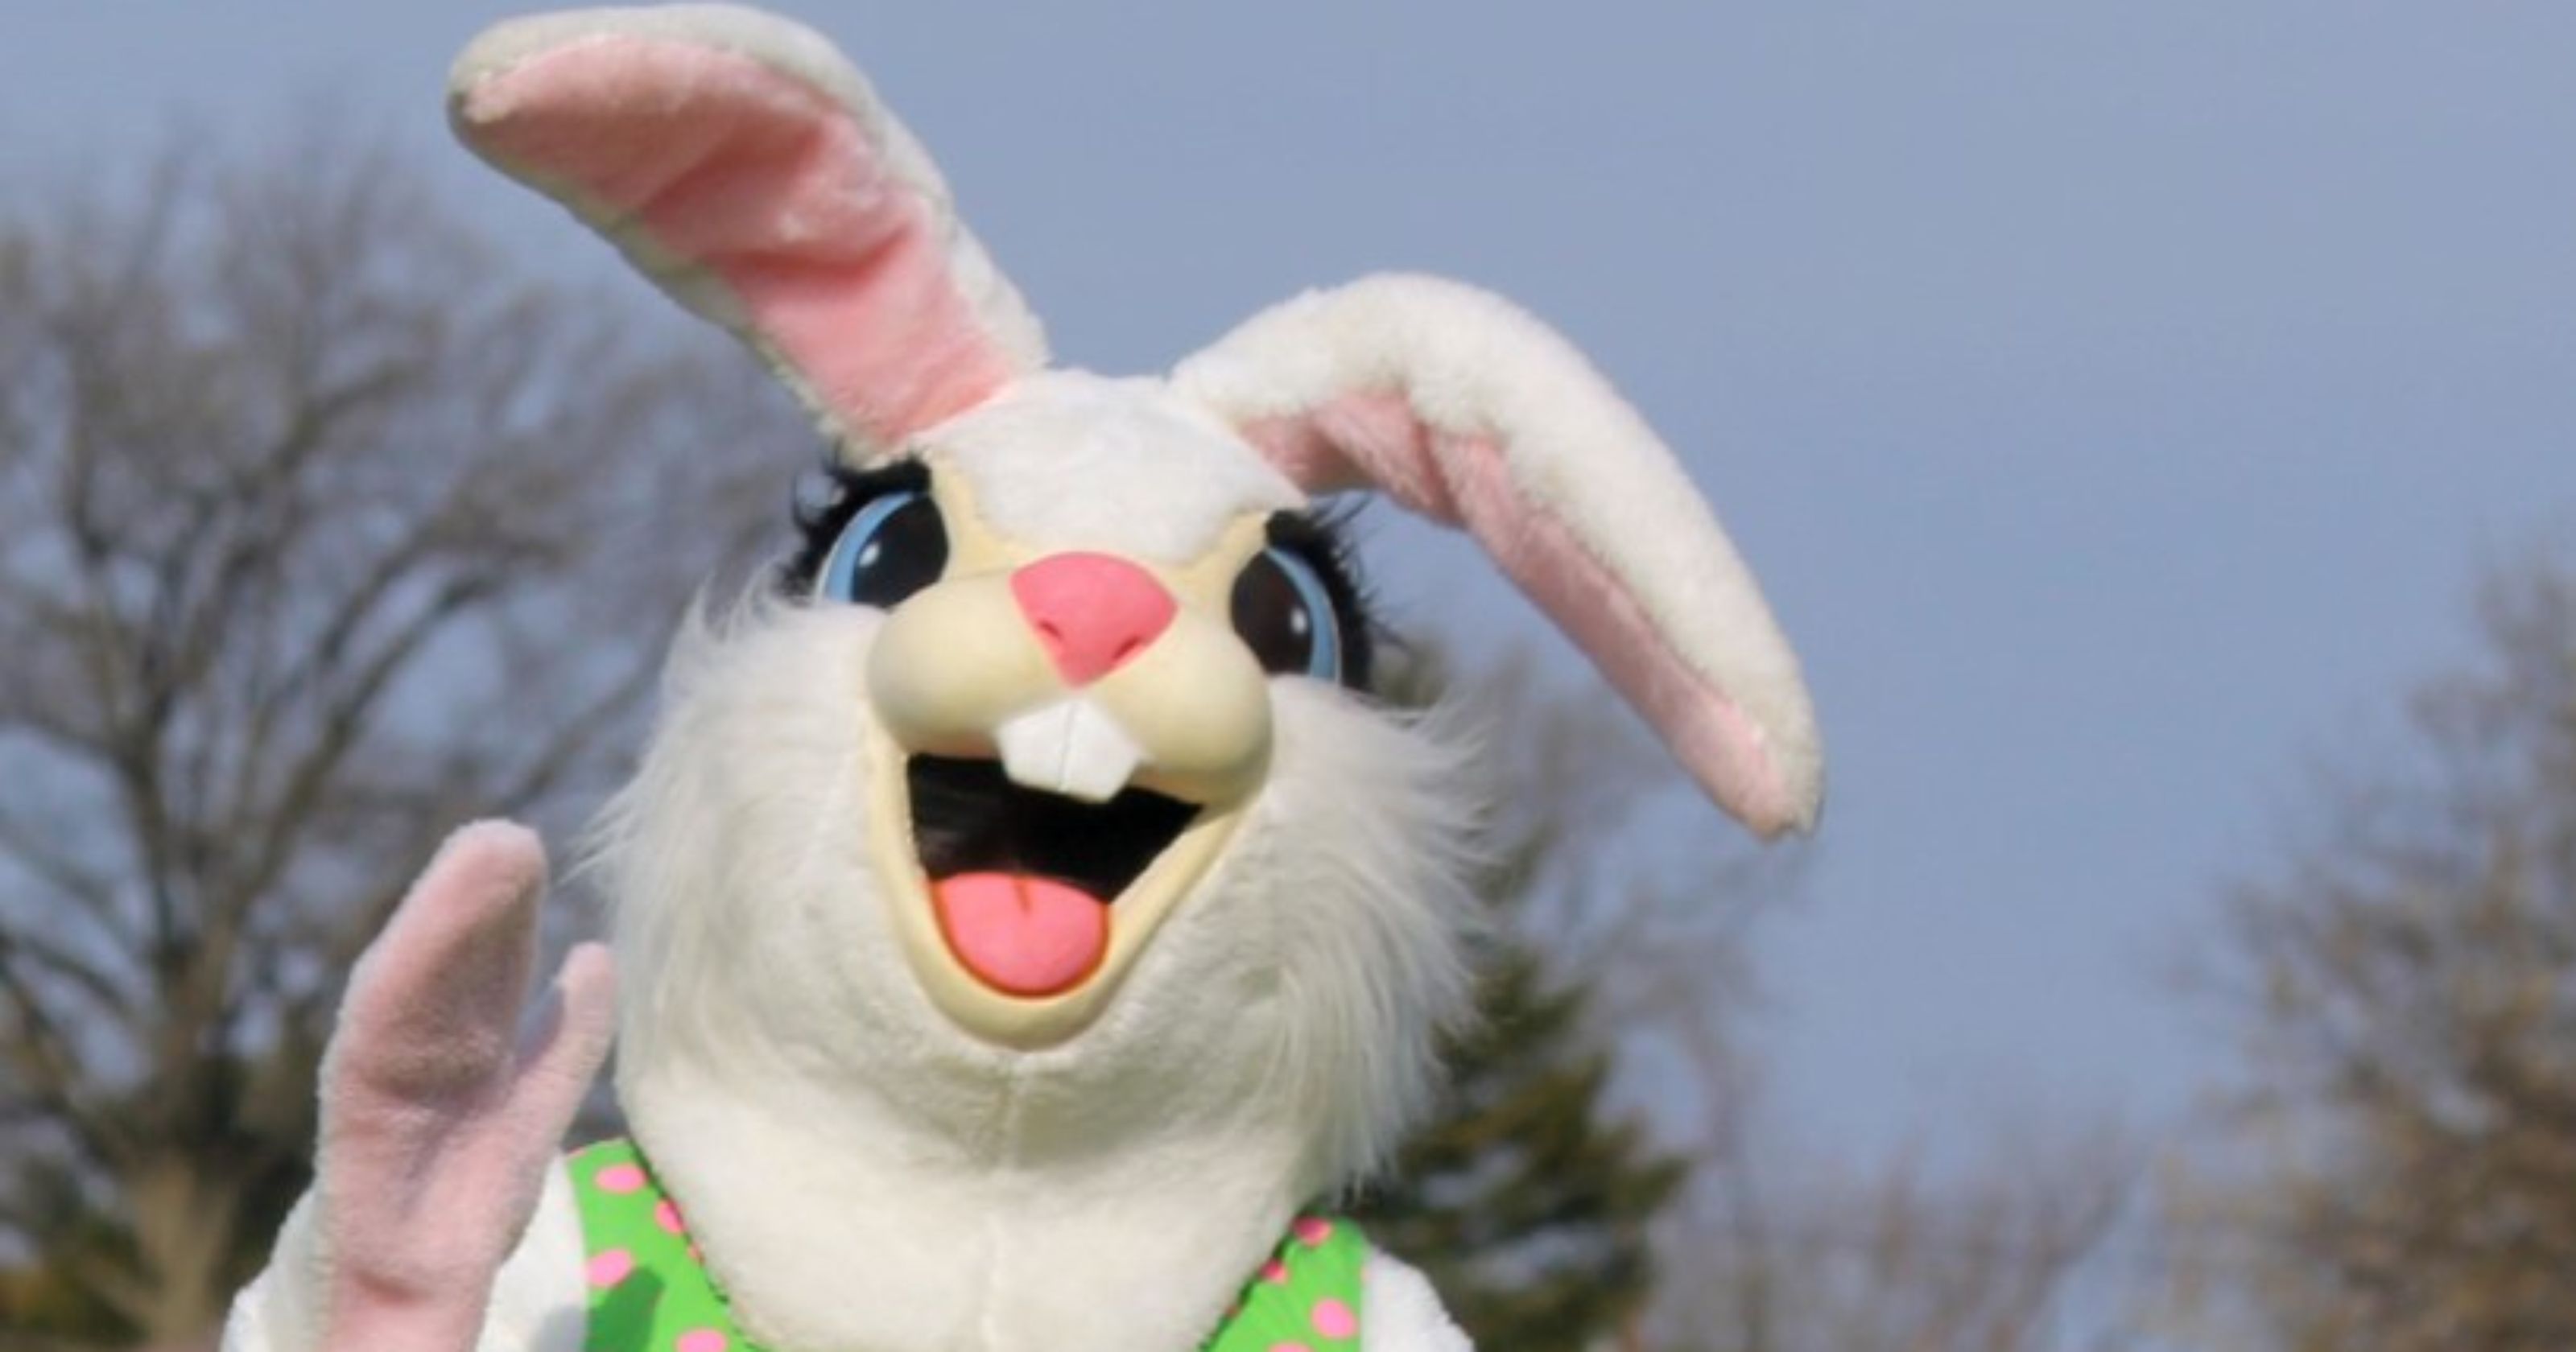 The Easter Bunny is having a bad year in 2018